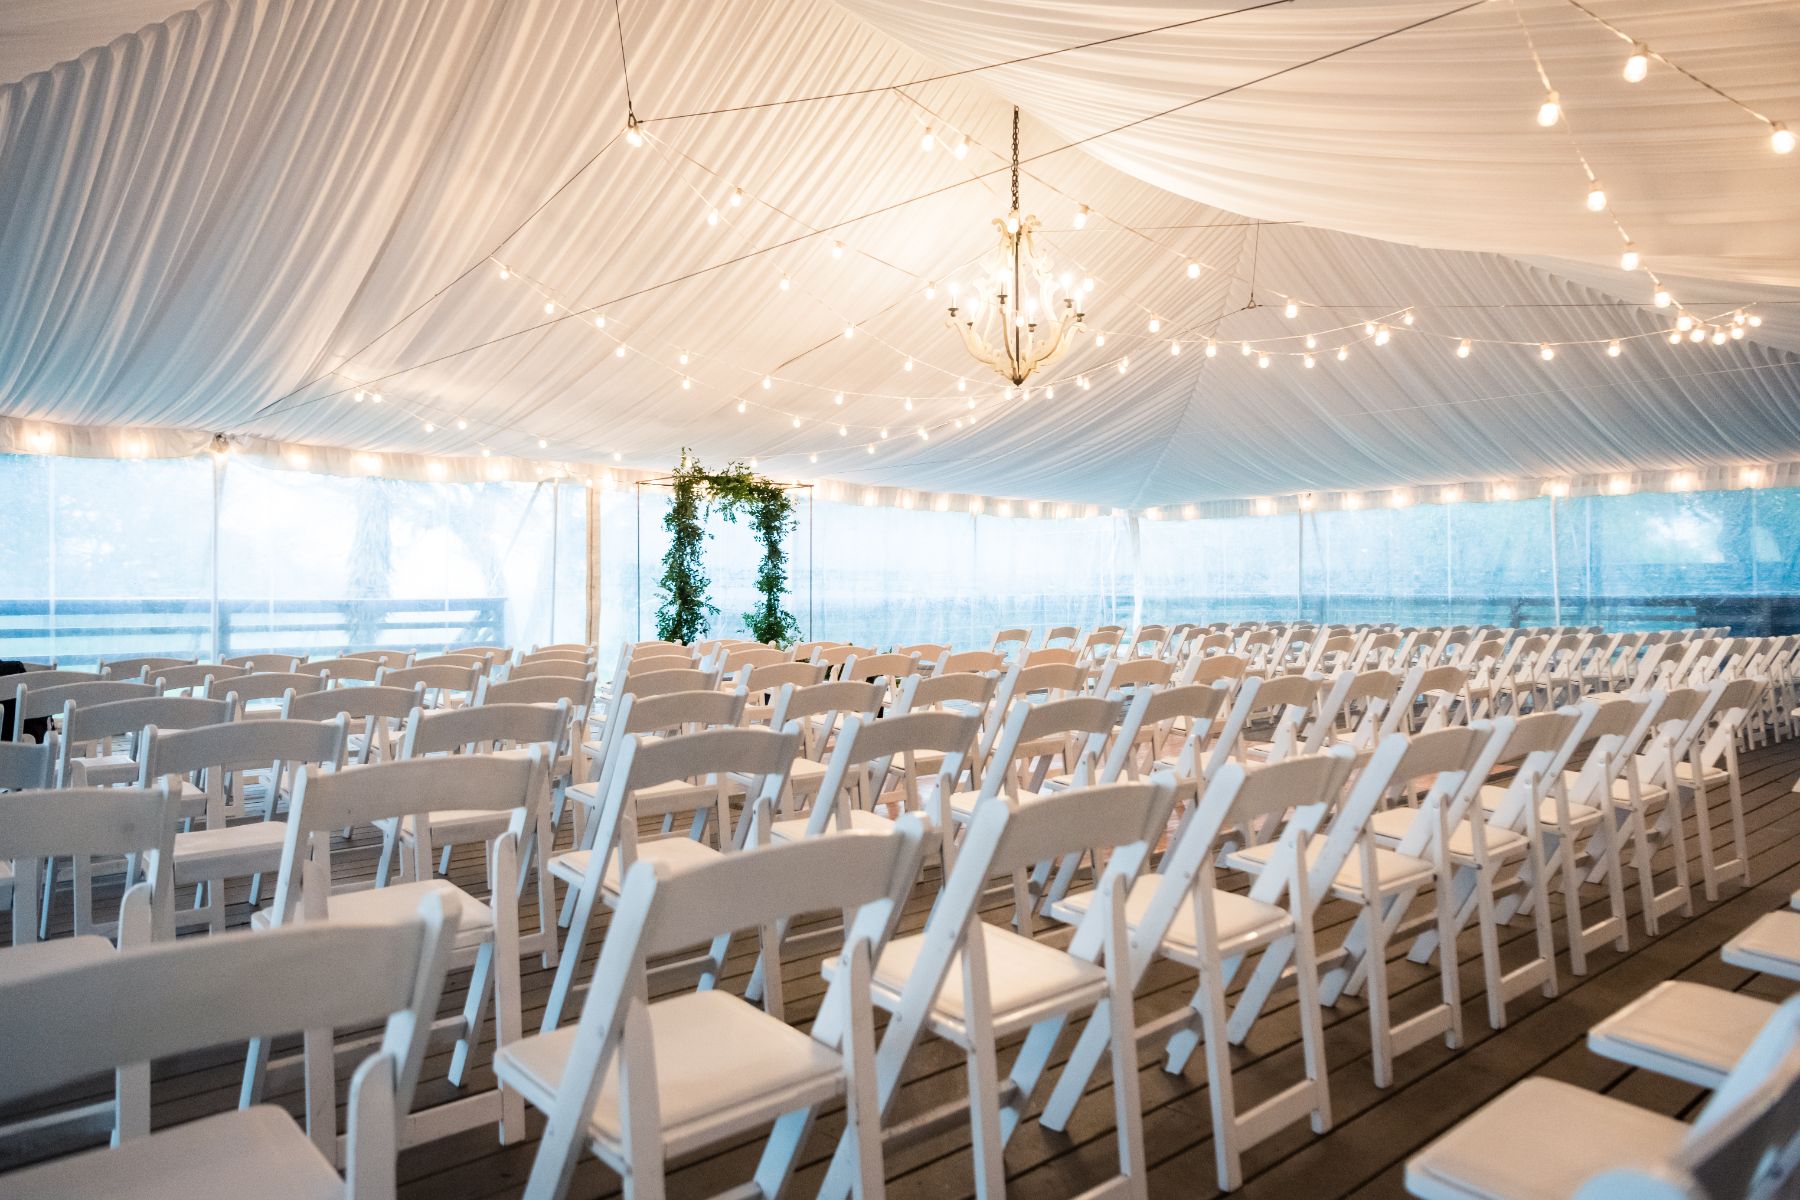 Wedding ceremony set up under an elegant white tent with bistro lighting and chandeliers at Stonehouse Villa.